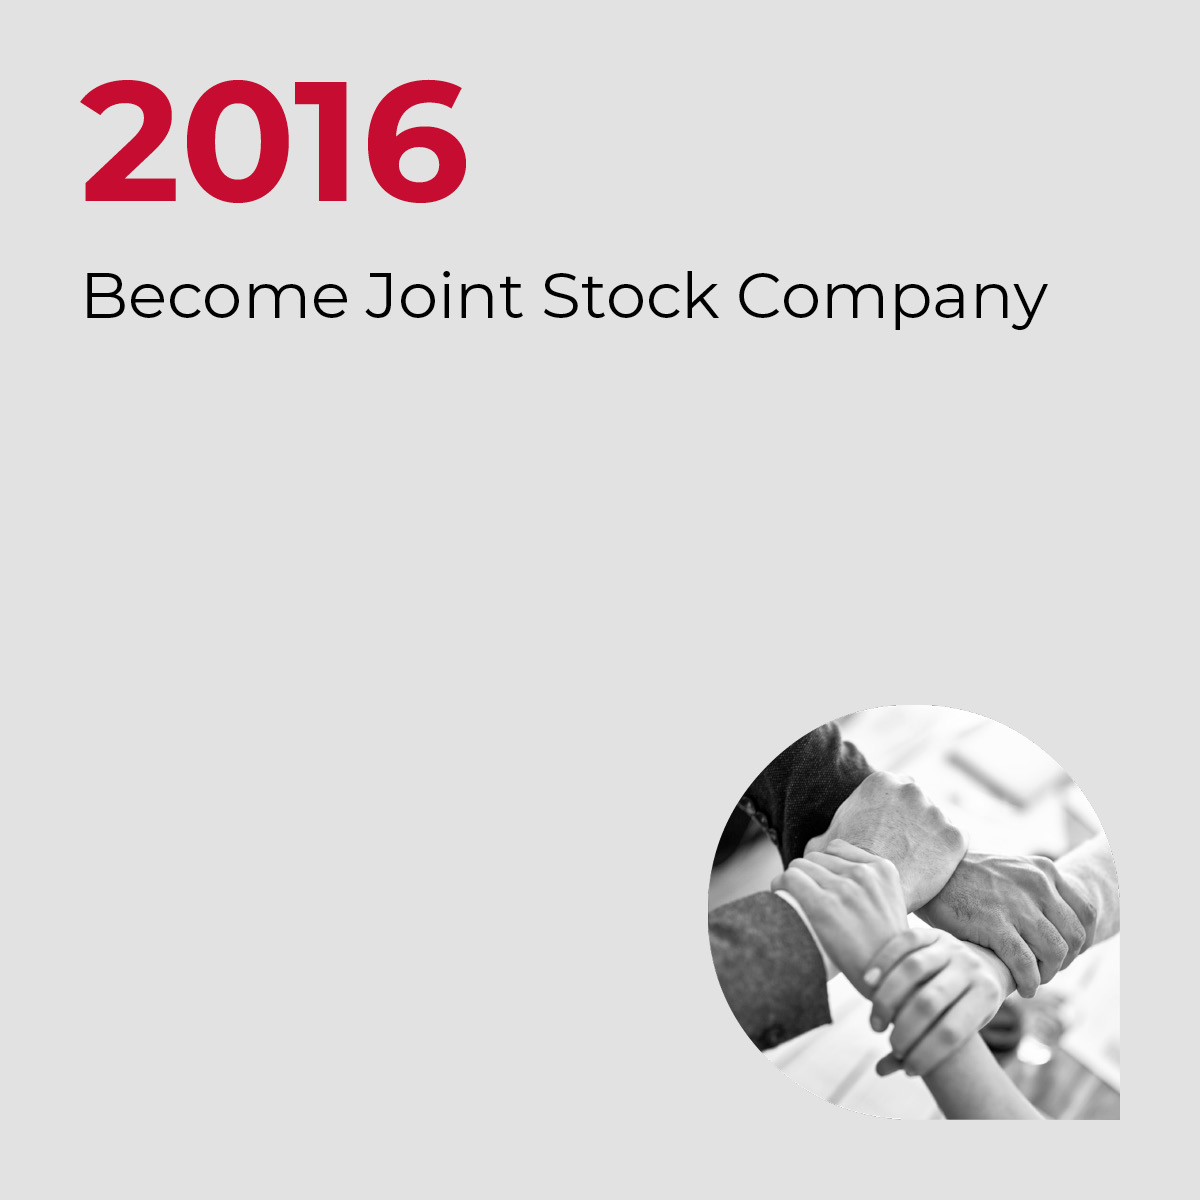 2016, Become Joint Stock Company